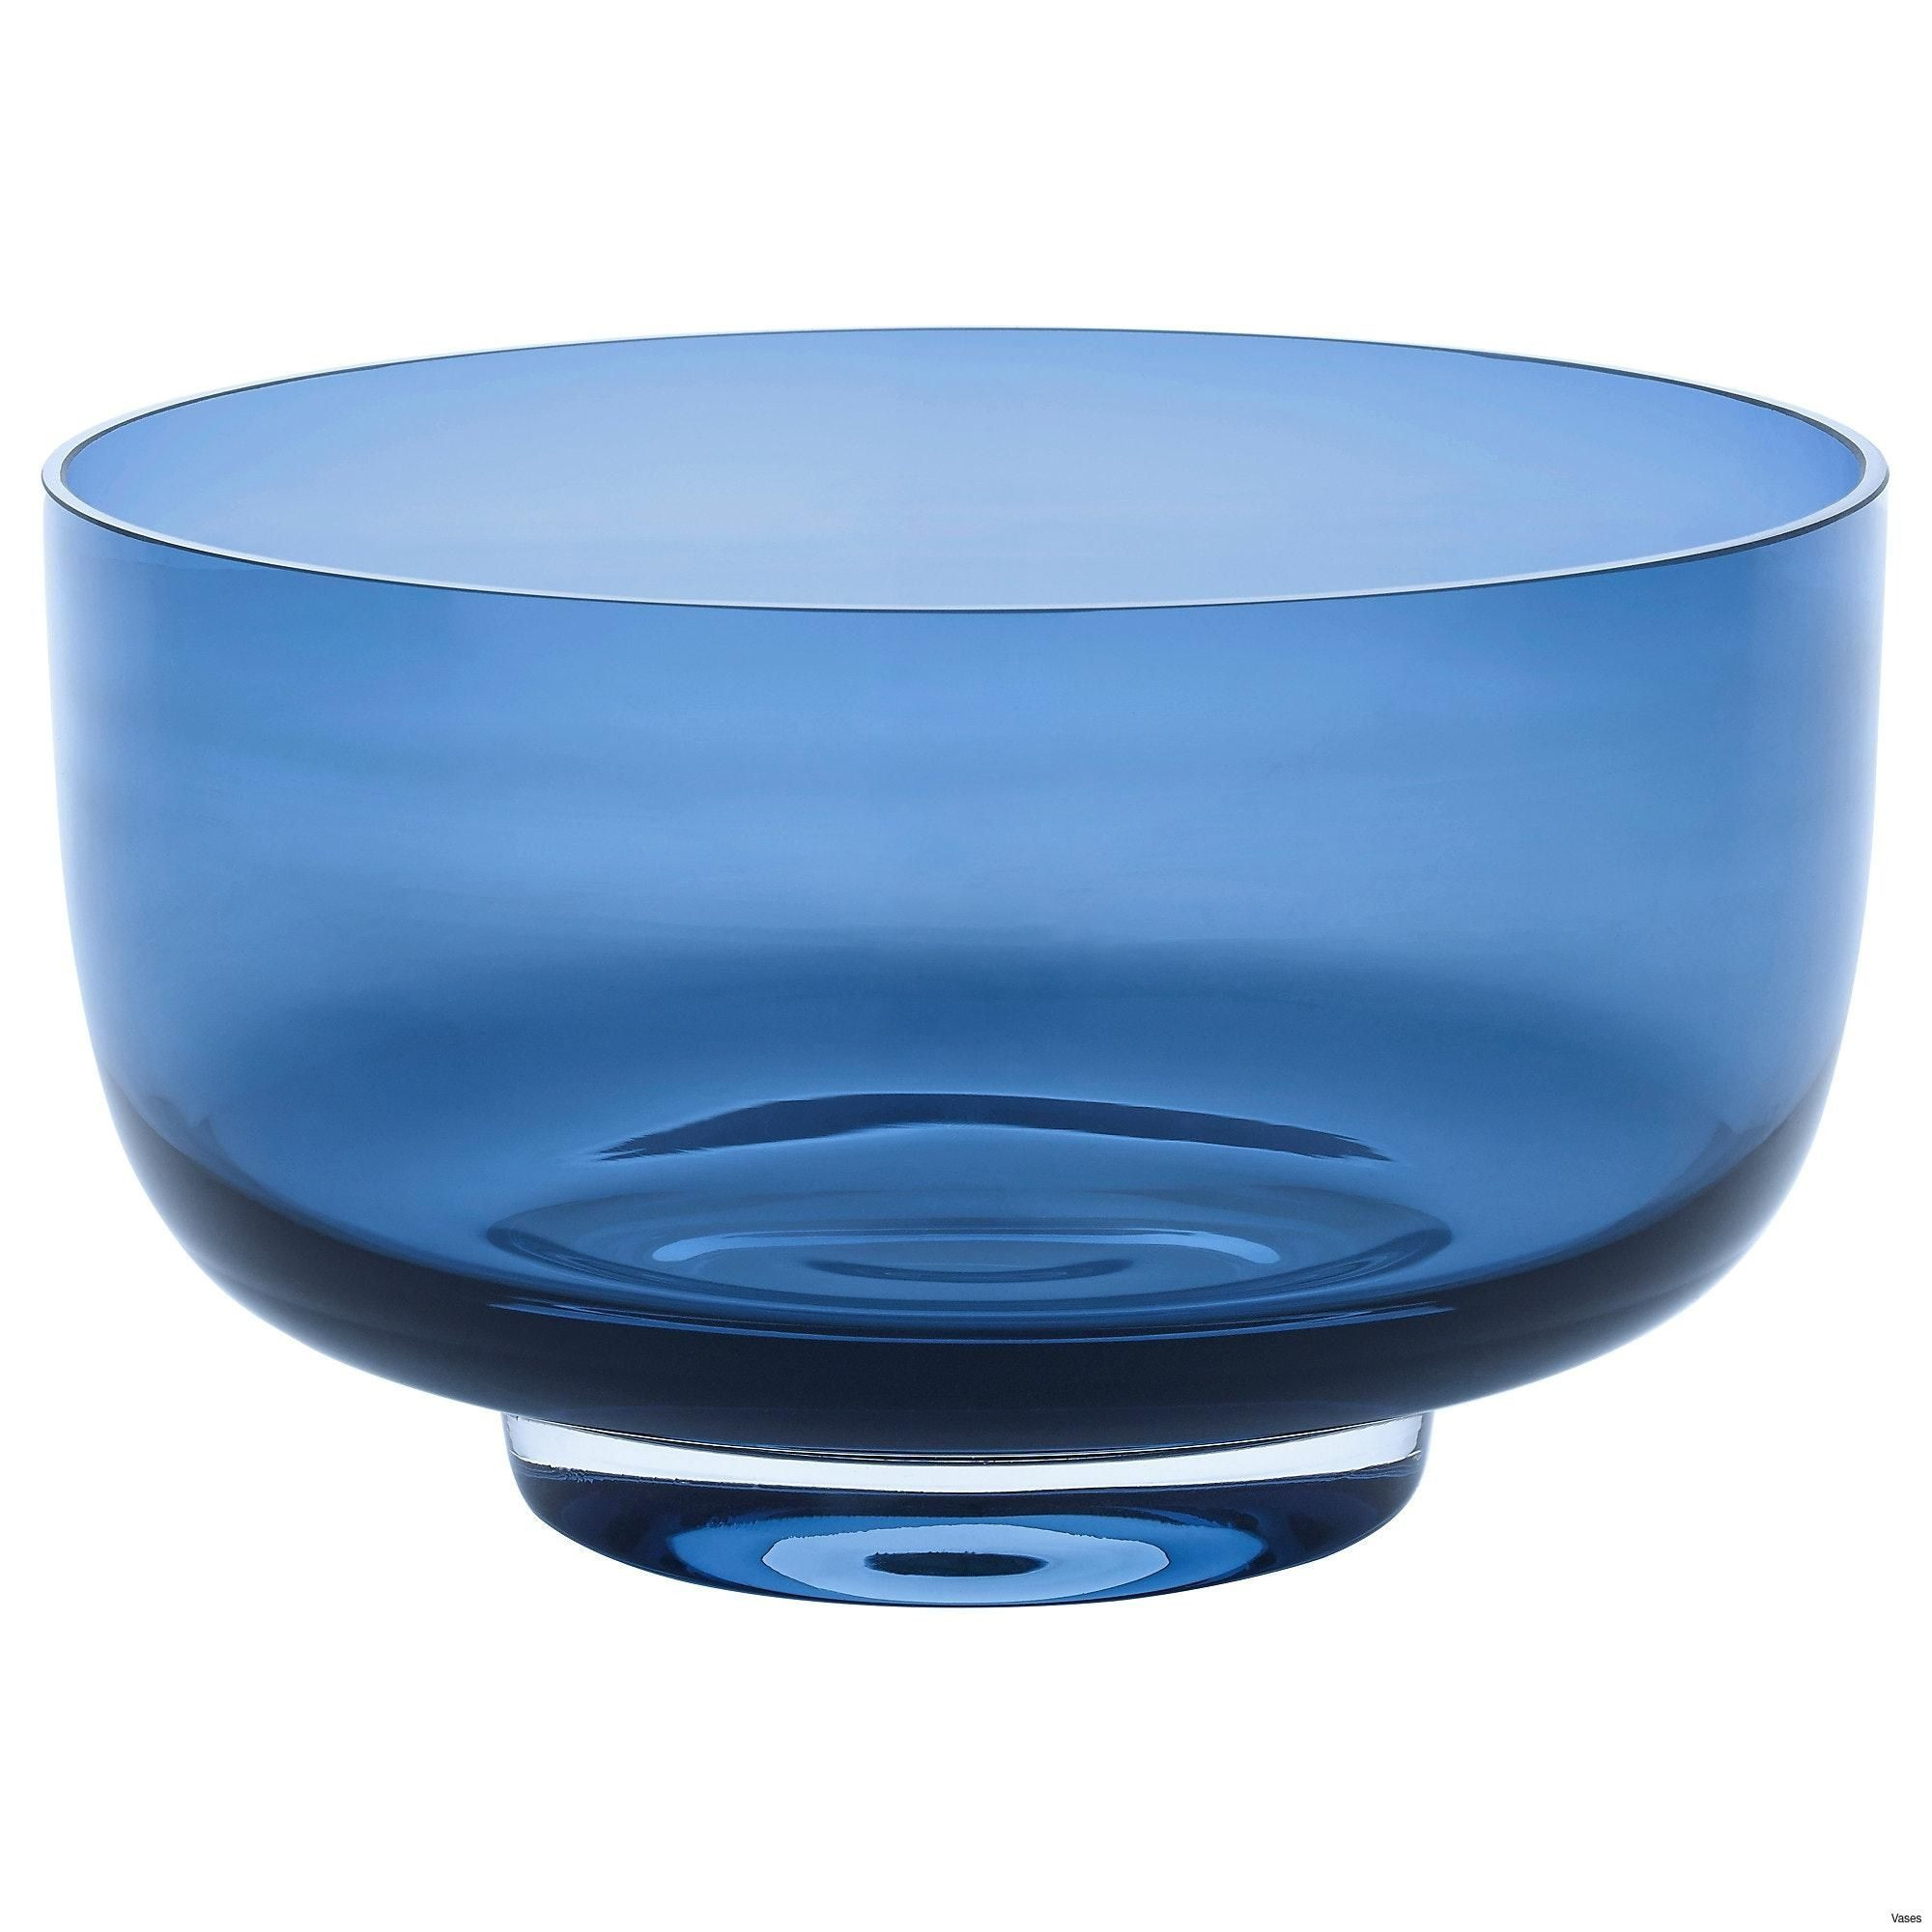 24 attractive Blue Table Vase 2024 free download blue table vase of 23 blue crystal vase the weekly world with decorative glass bowl new living room ikea vases awesome pe s5h